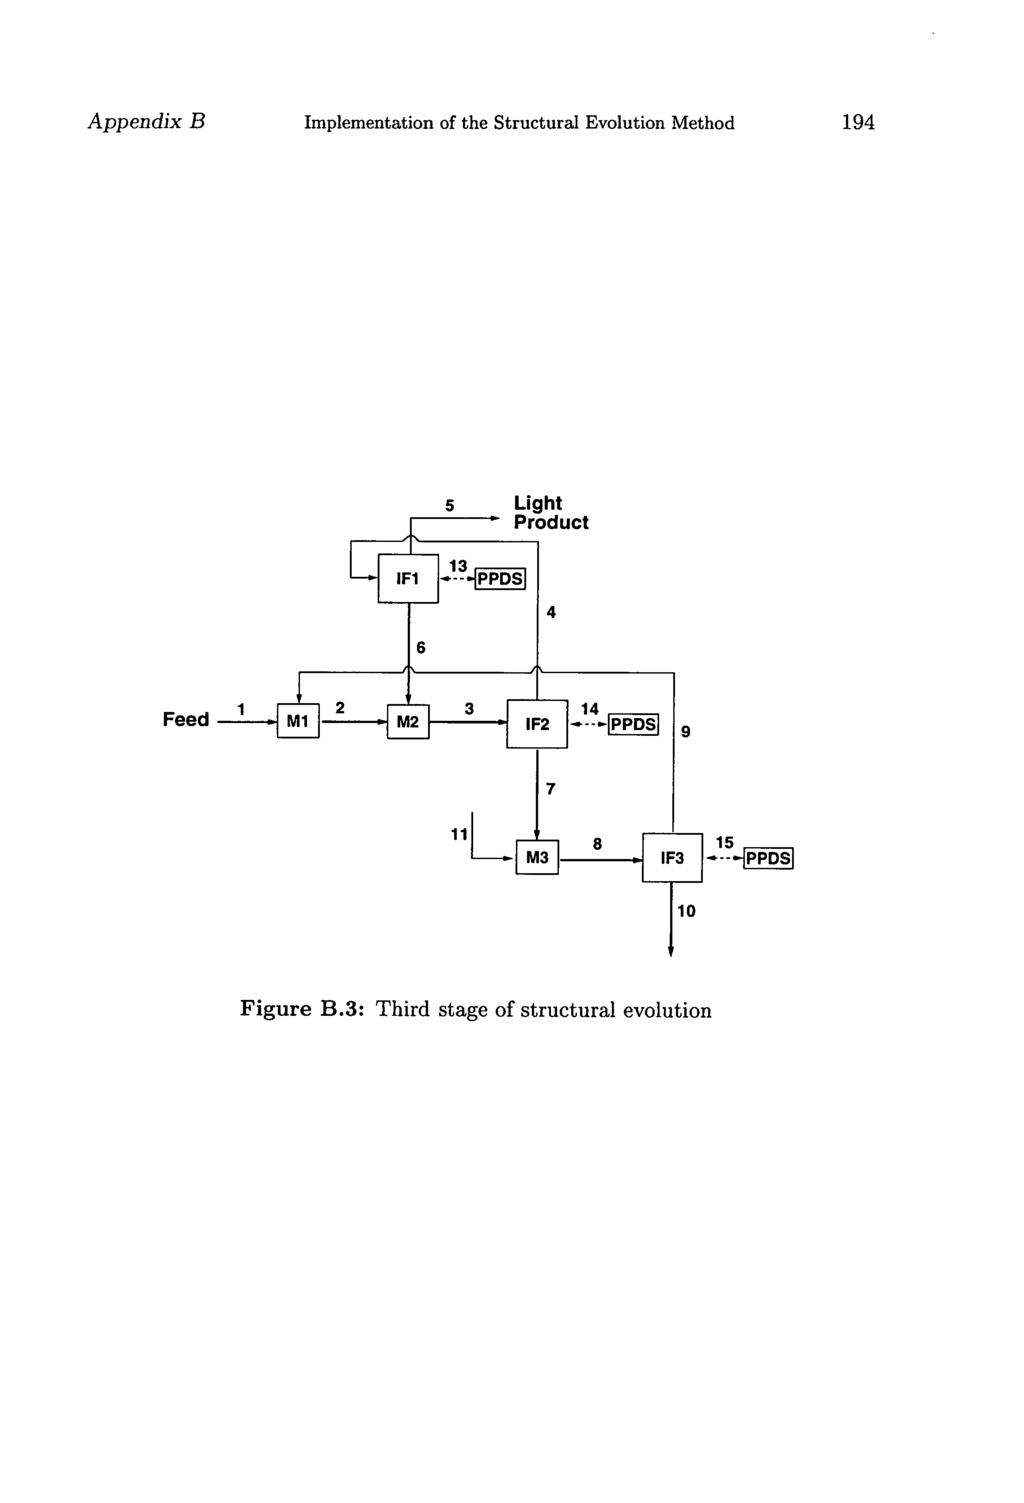 Appendix B Implementation of the Structural Evolution Method 194 5 Light Product IF1 1PPDSl